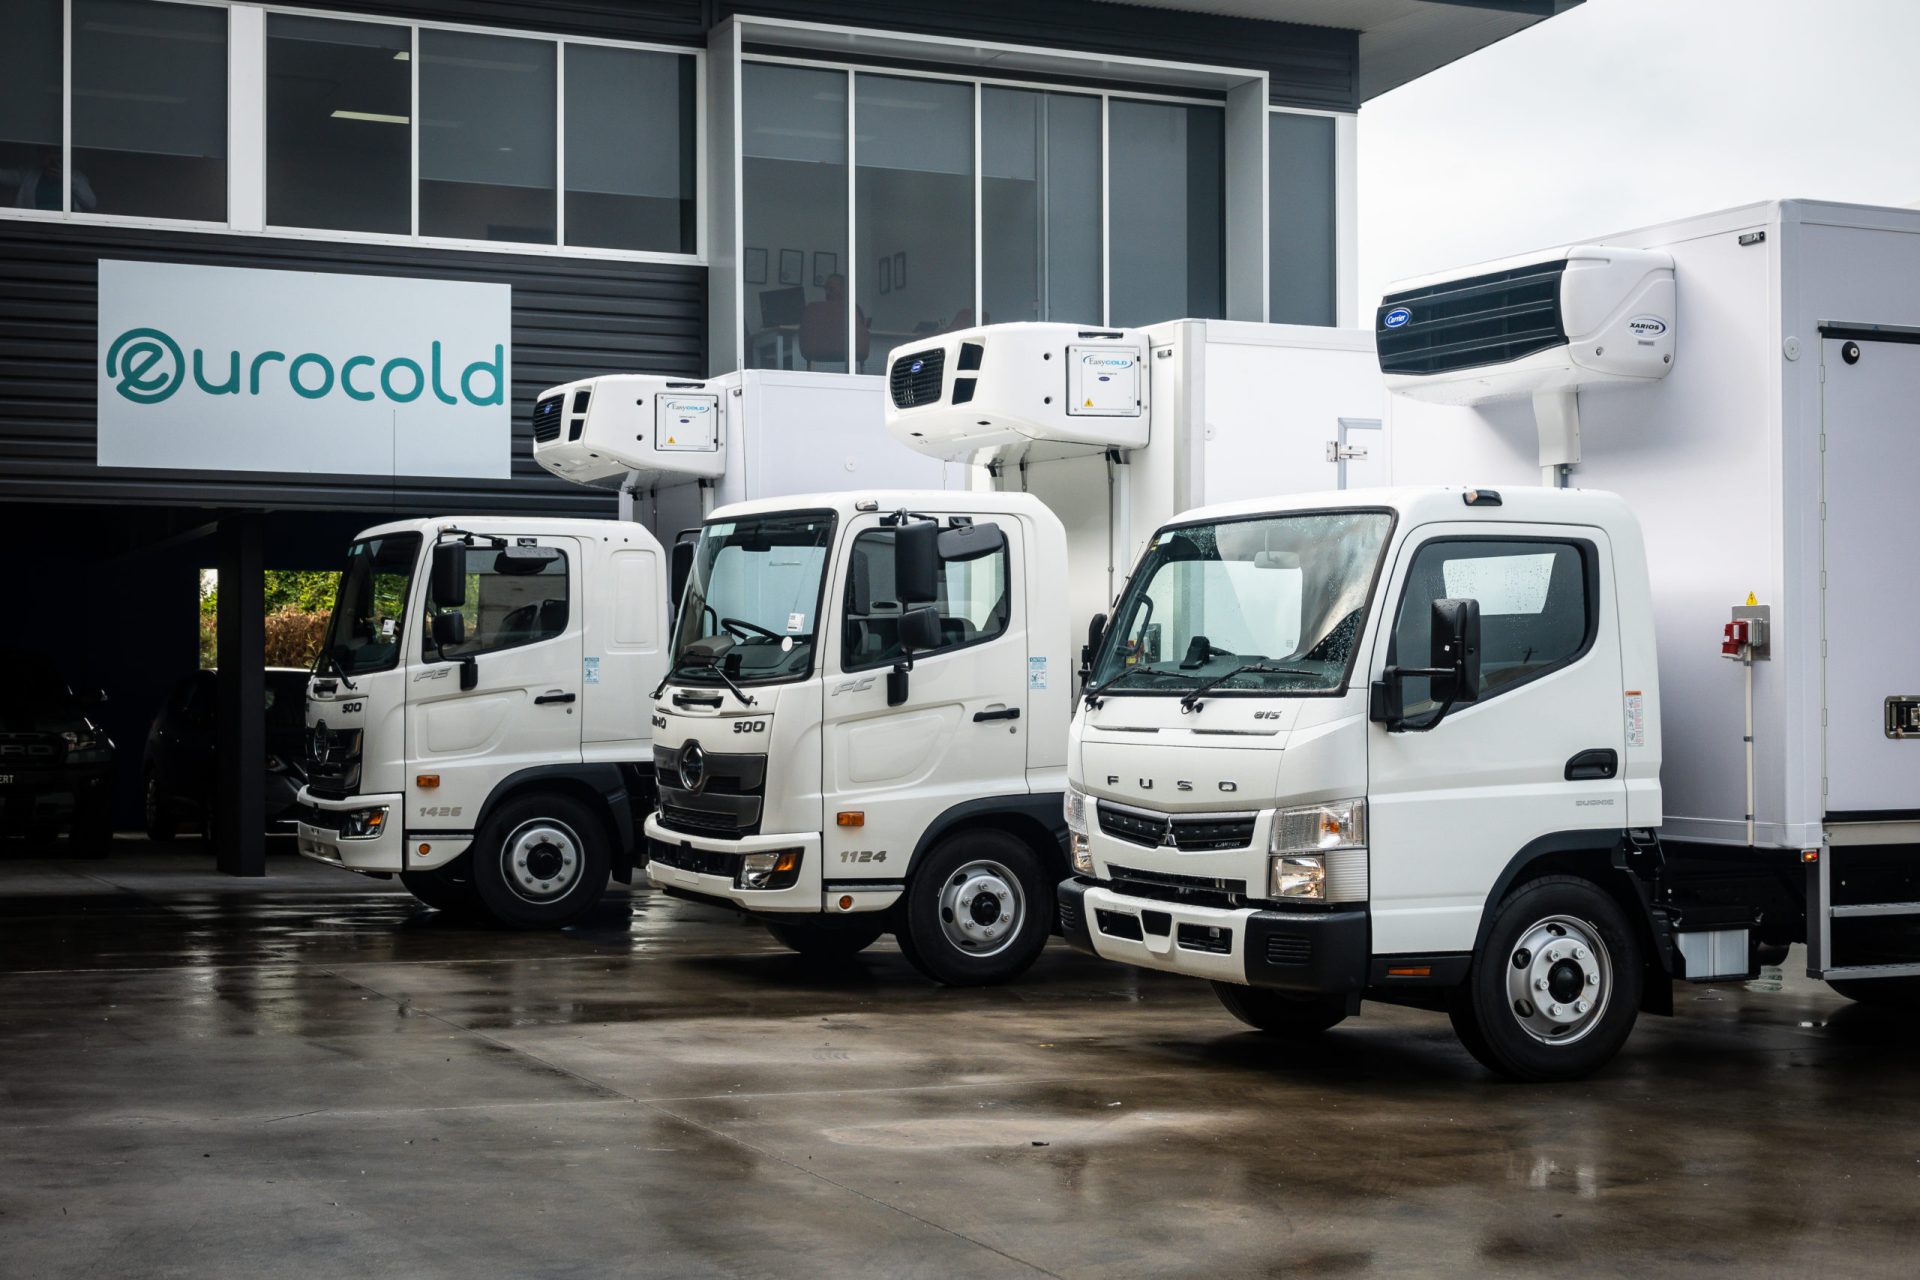 Refrigerated Van Rentals: How to Keep Costs Low and Efficiency High